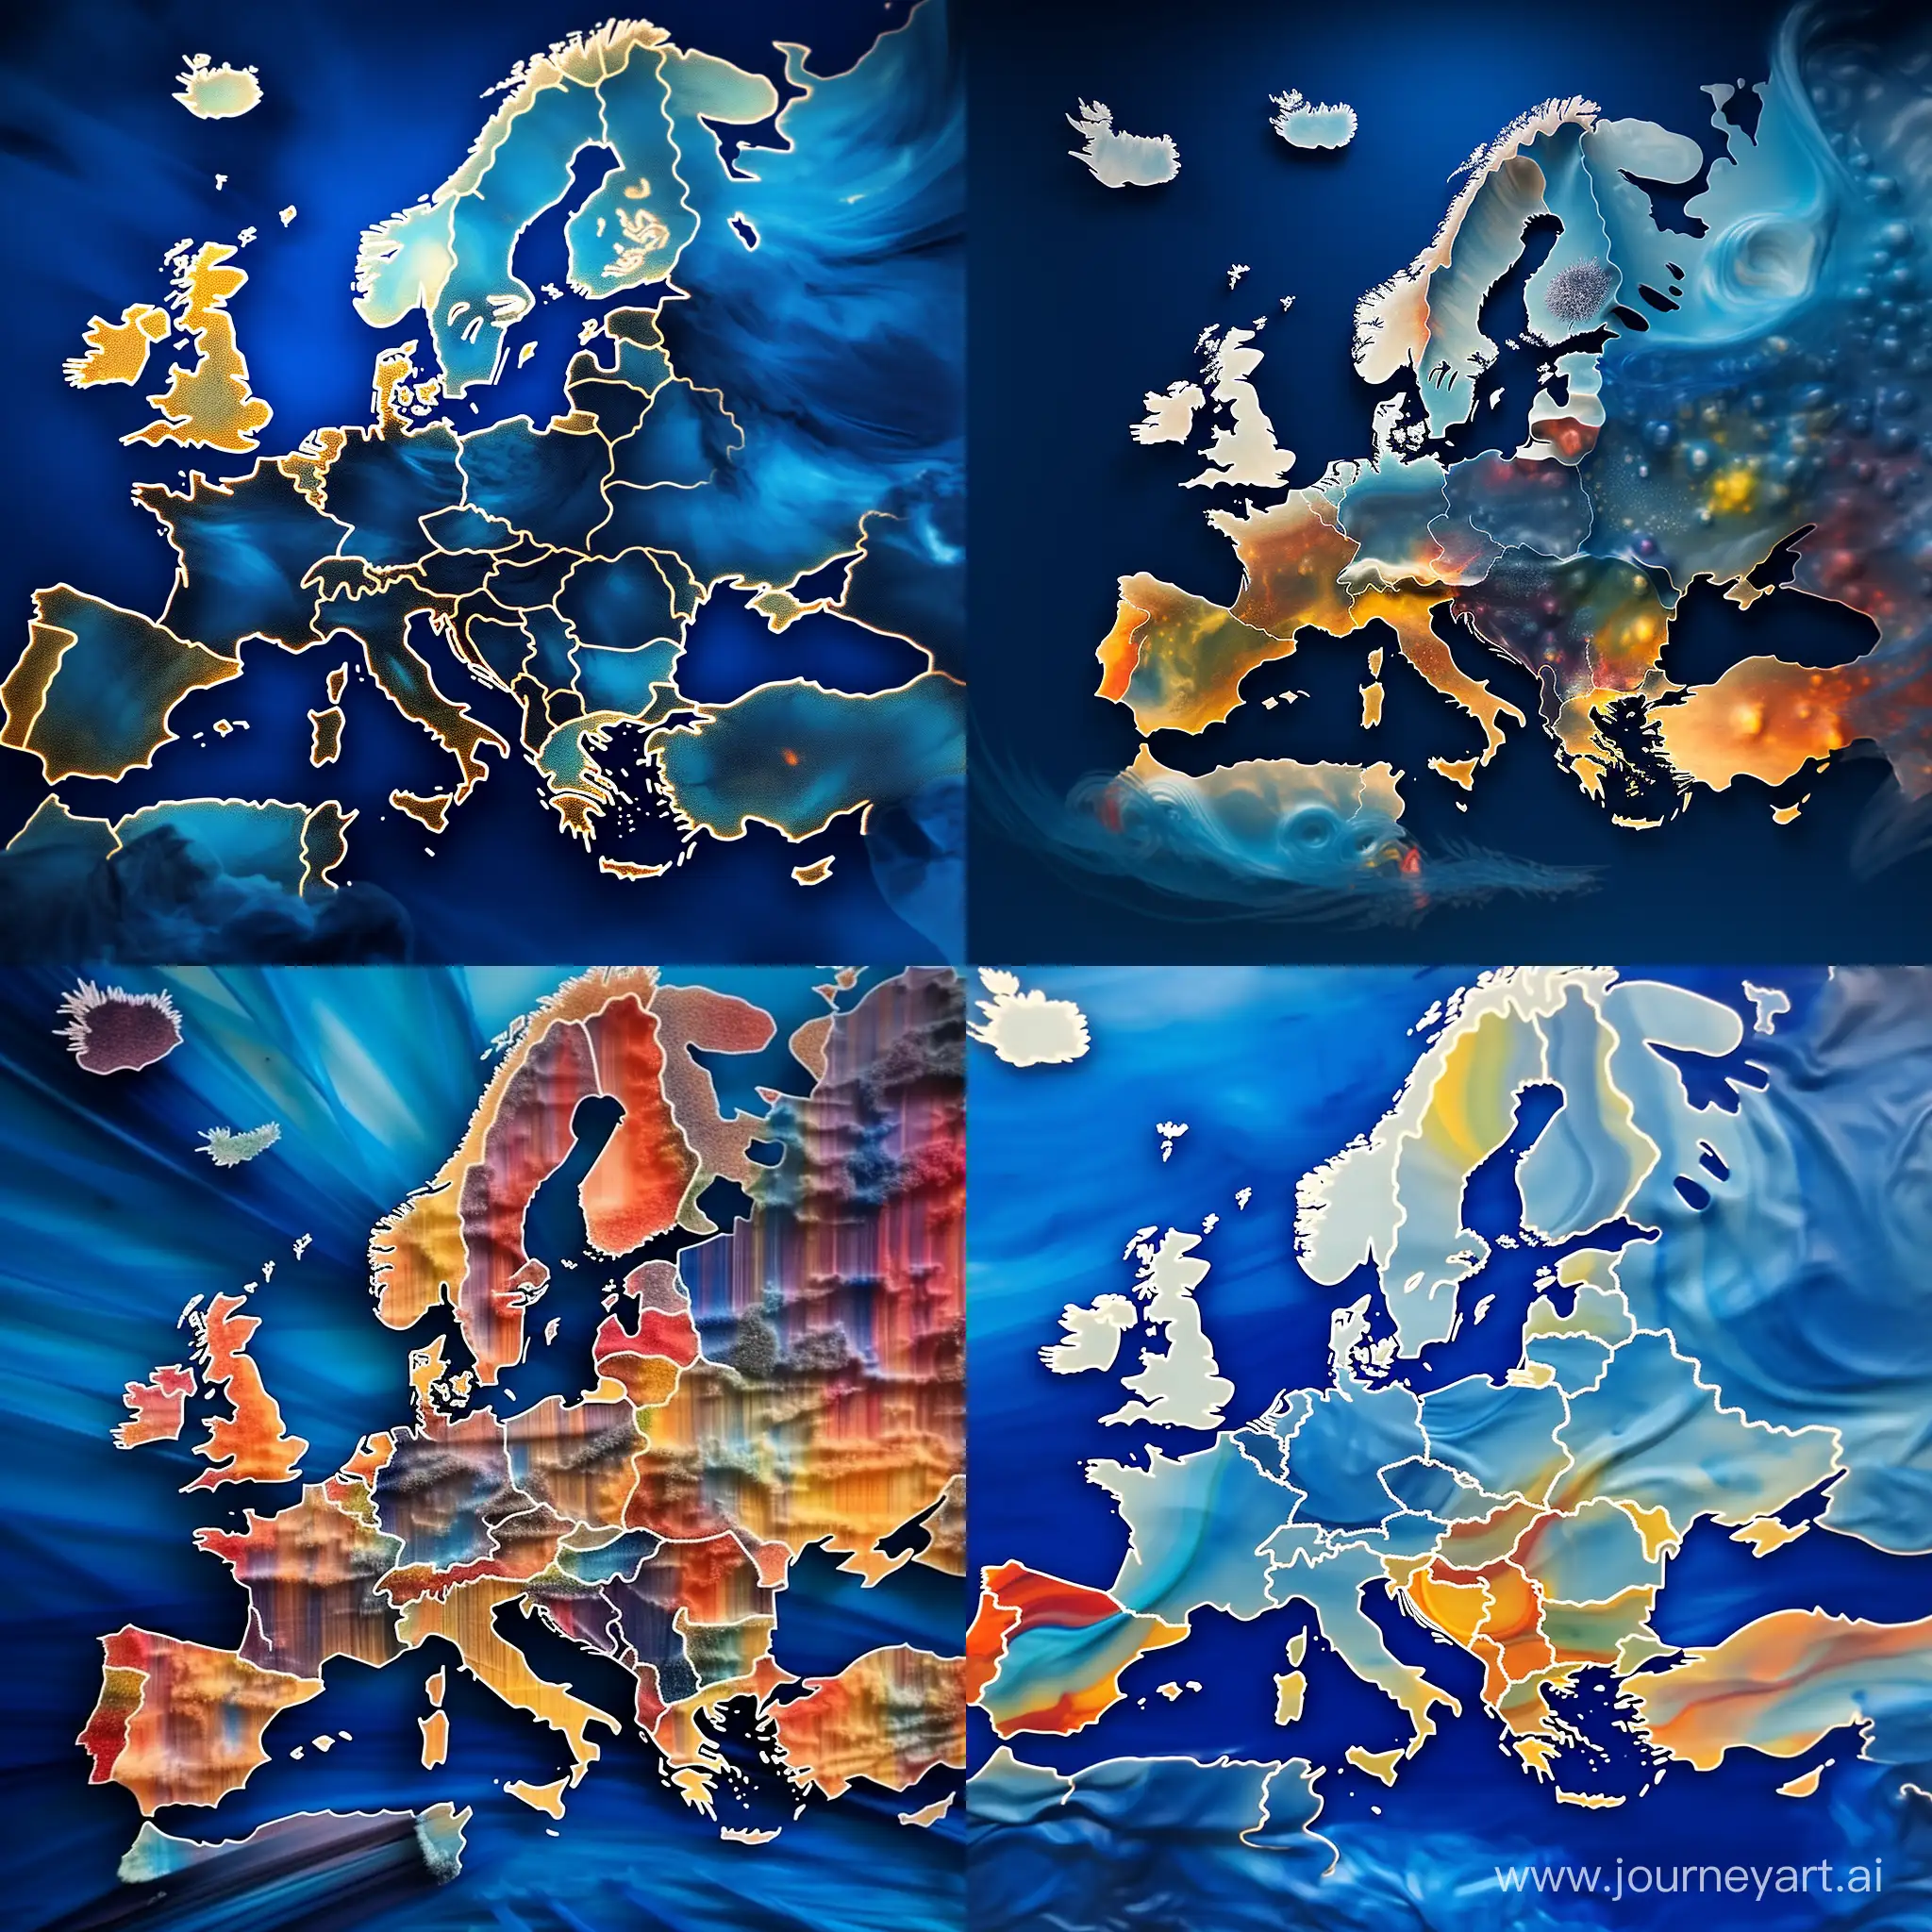 The map of Europe, the names of the countries are clear, it is very artistically designed, the flight lines of the airplanes are blurred, the ocean is blue, the dimensions are 1080 x 1920, the colors of the countries are separated from each other by color.